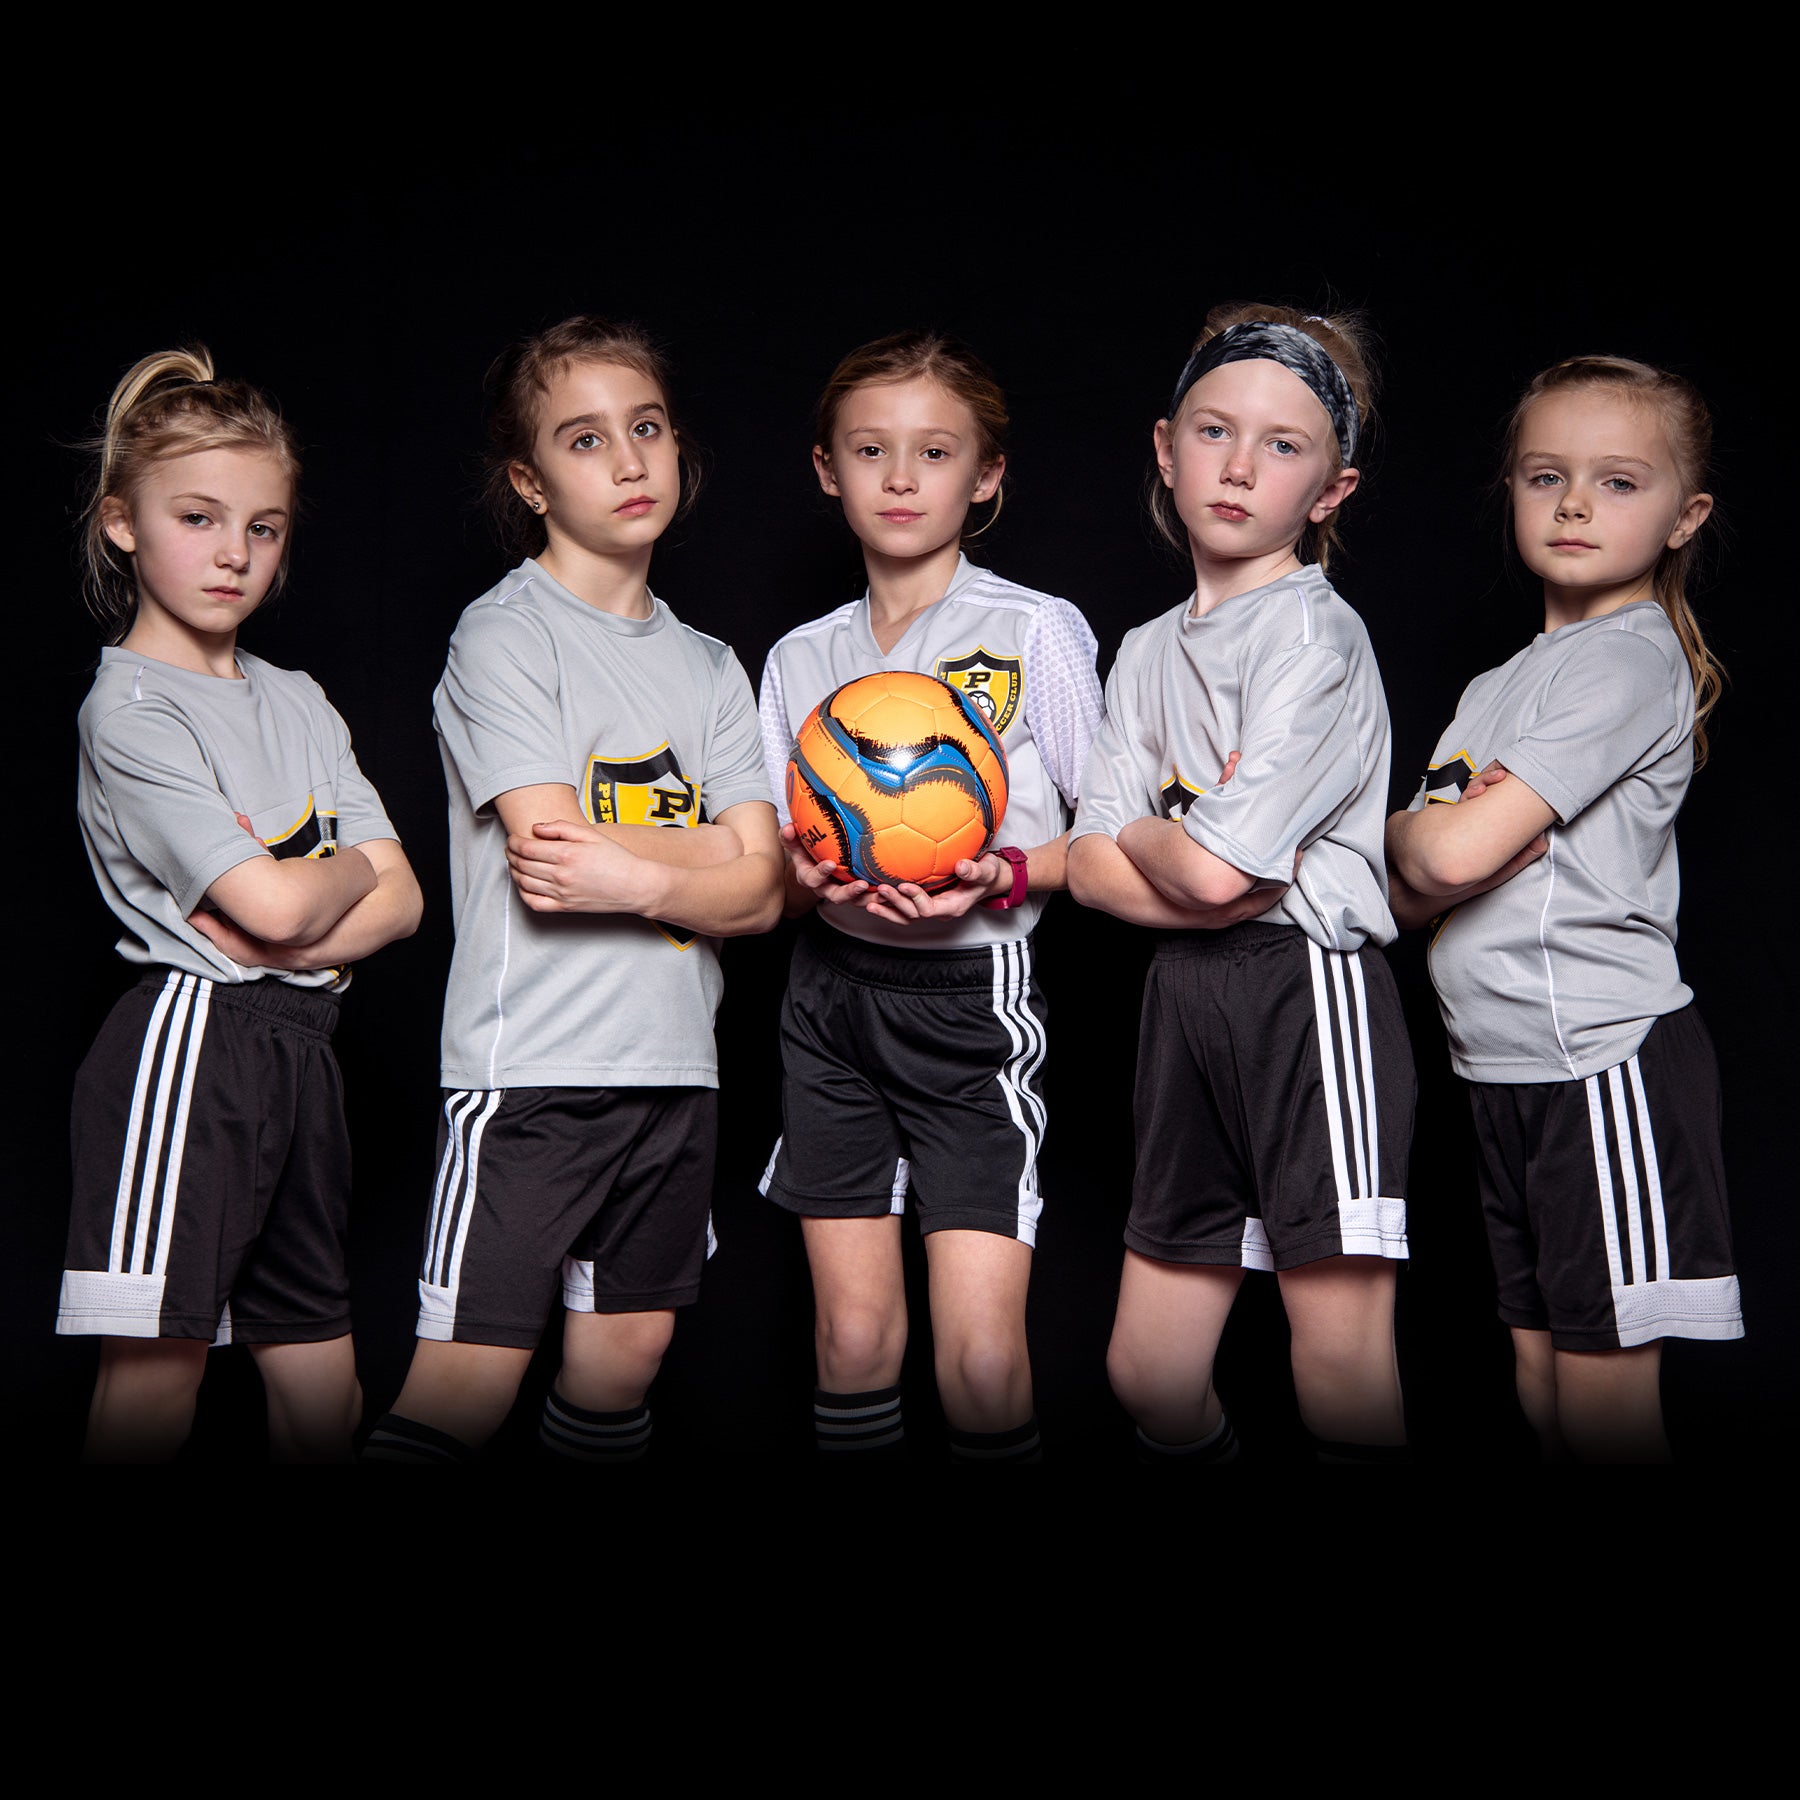 X-Drop Pro Backdrop being used in small group sports team photo